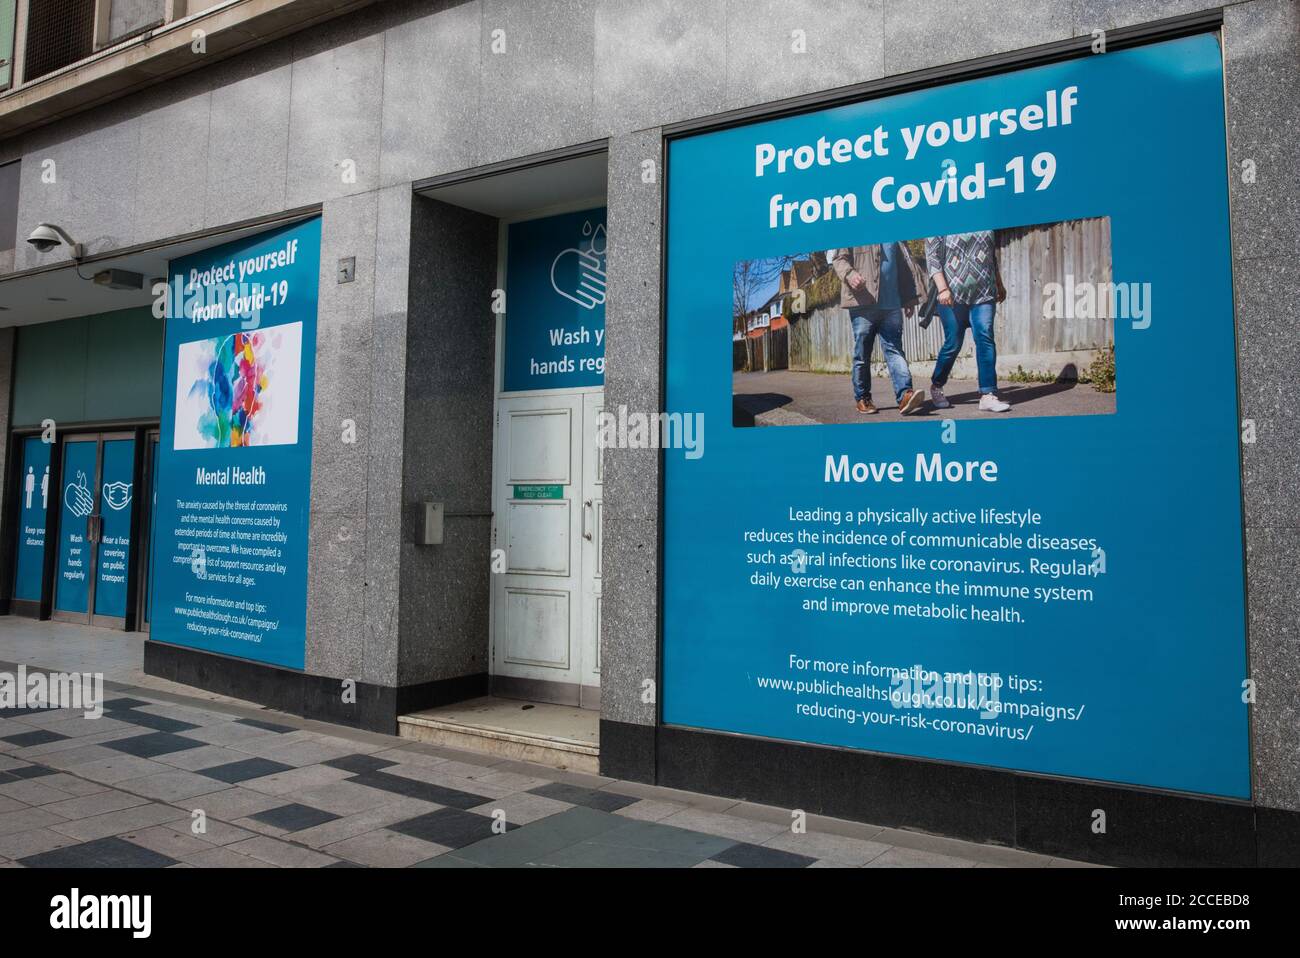 Slough, UK. 21 August, 2020. COVID-19 public information posters displayed in shop windows in the town centre. Slough has been listed by Public Health England (PHE) and the Department of Health and Social Care (DHSC) as an ‘area of concern’ for COVID-19 following a rise in positive coronavirus cases over the last two weeks. Credit: Mark Kerrison/Alamy Live News Stock Photo